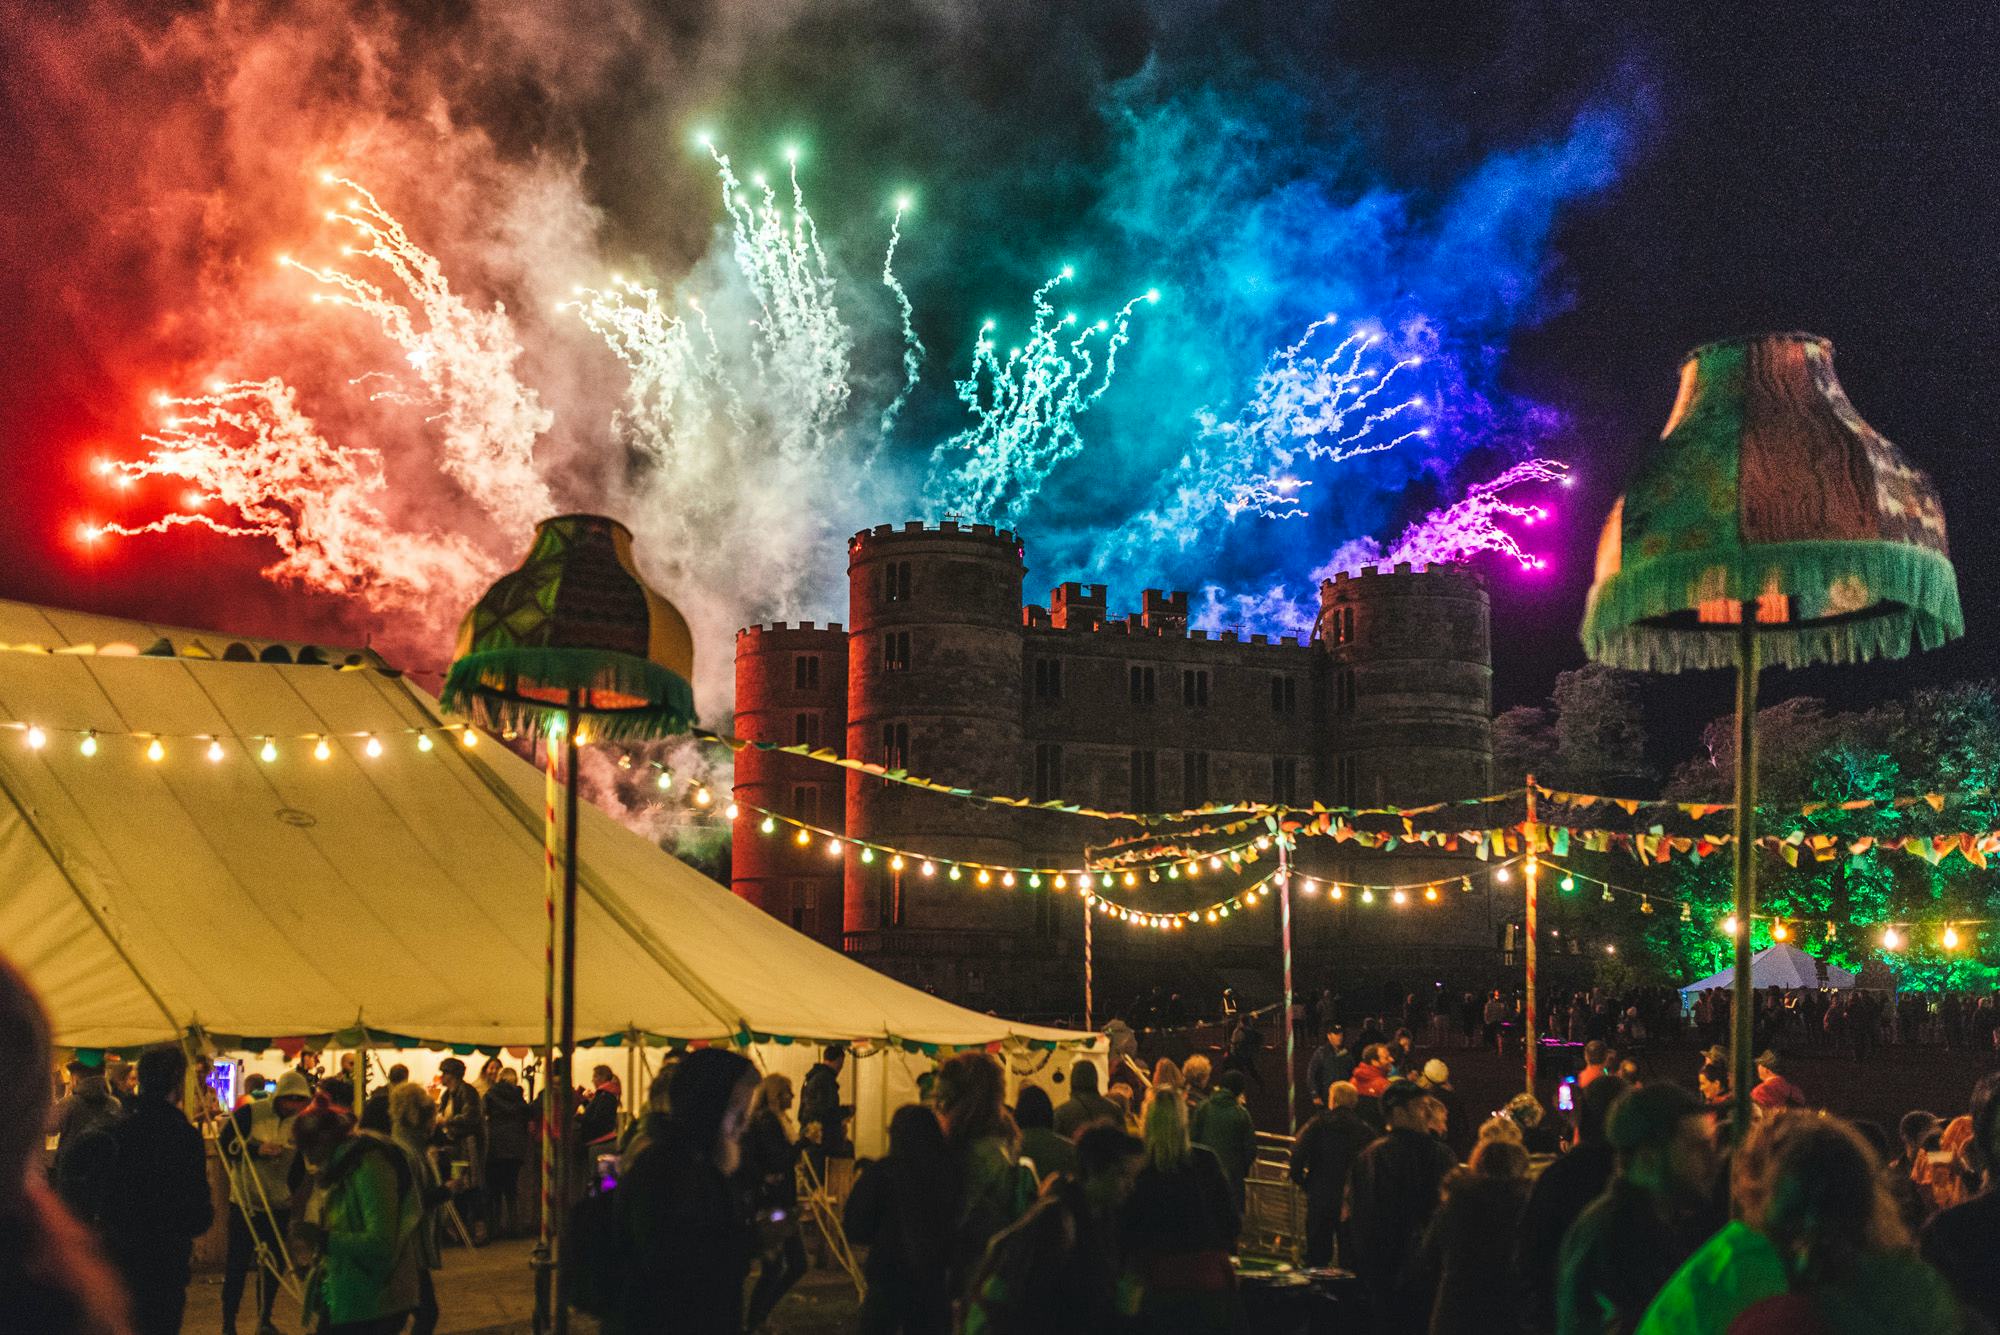 SquareMeal Event review Bestival 7 to 10 September 2017 hospitality tent lulworth castle